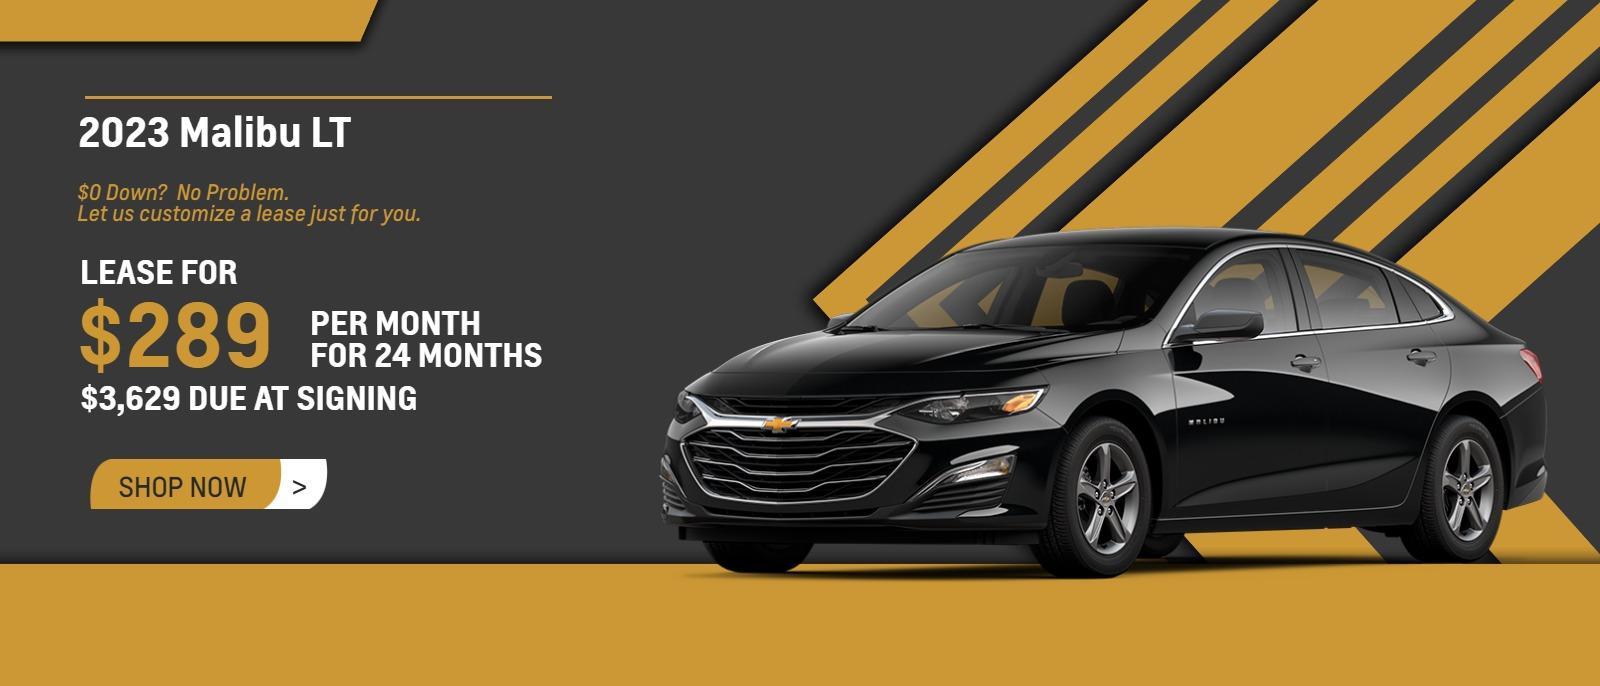 New Car Leasing Deals Available at Ron Westphal Chevy